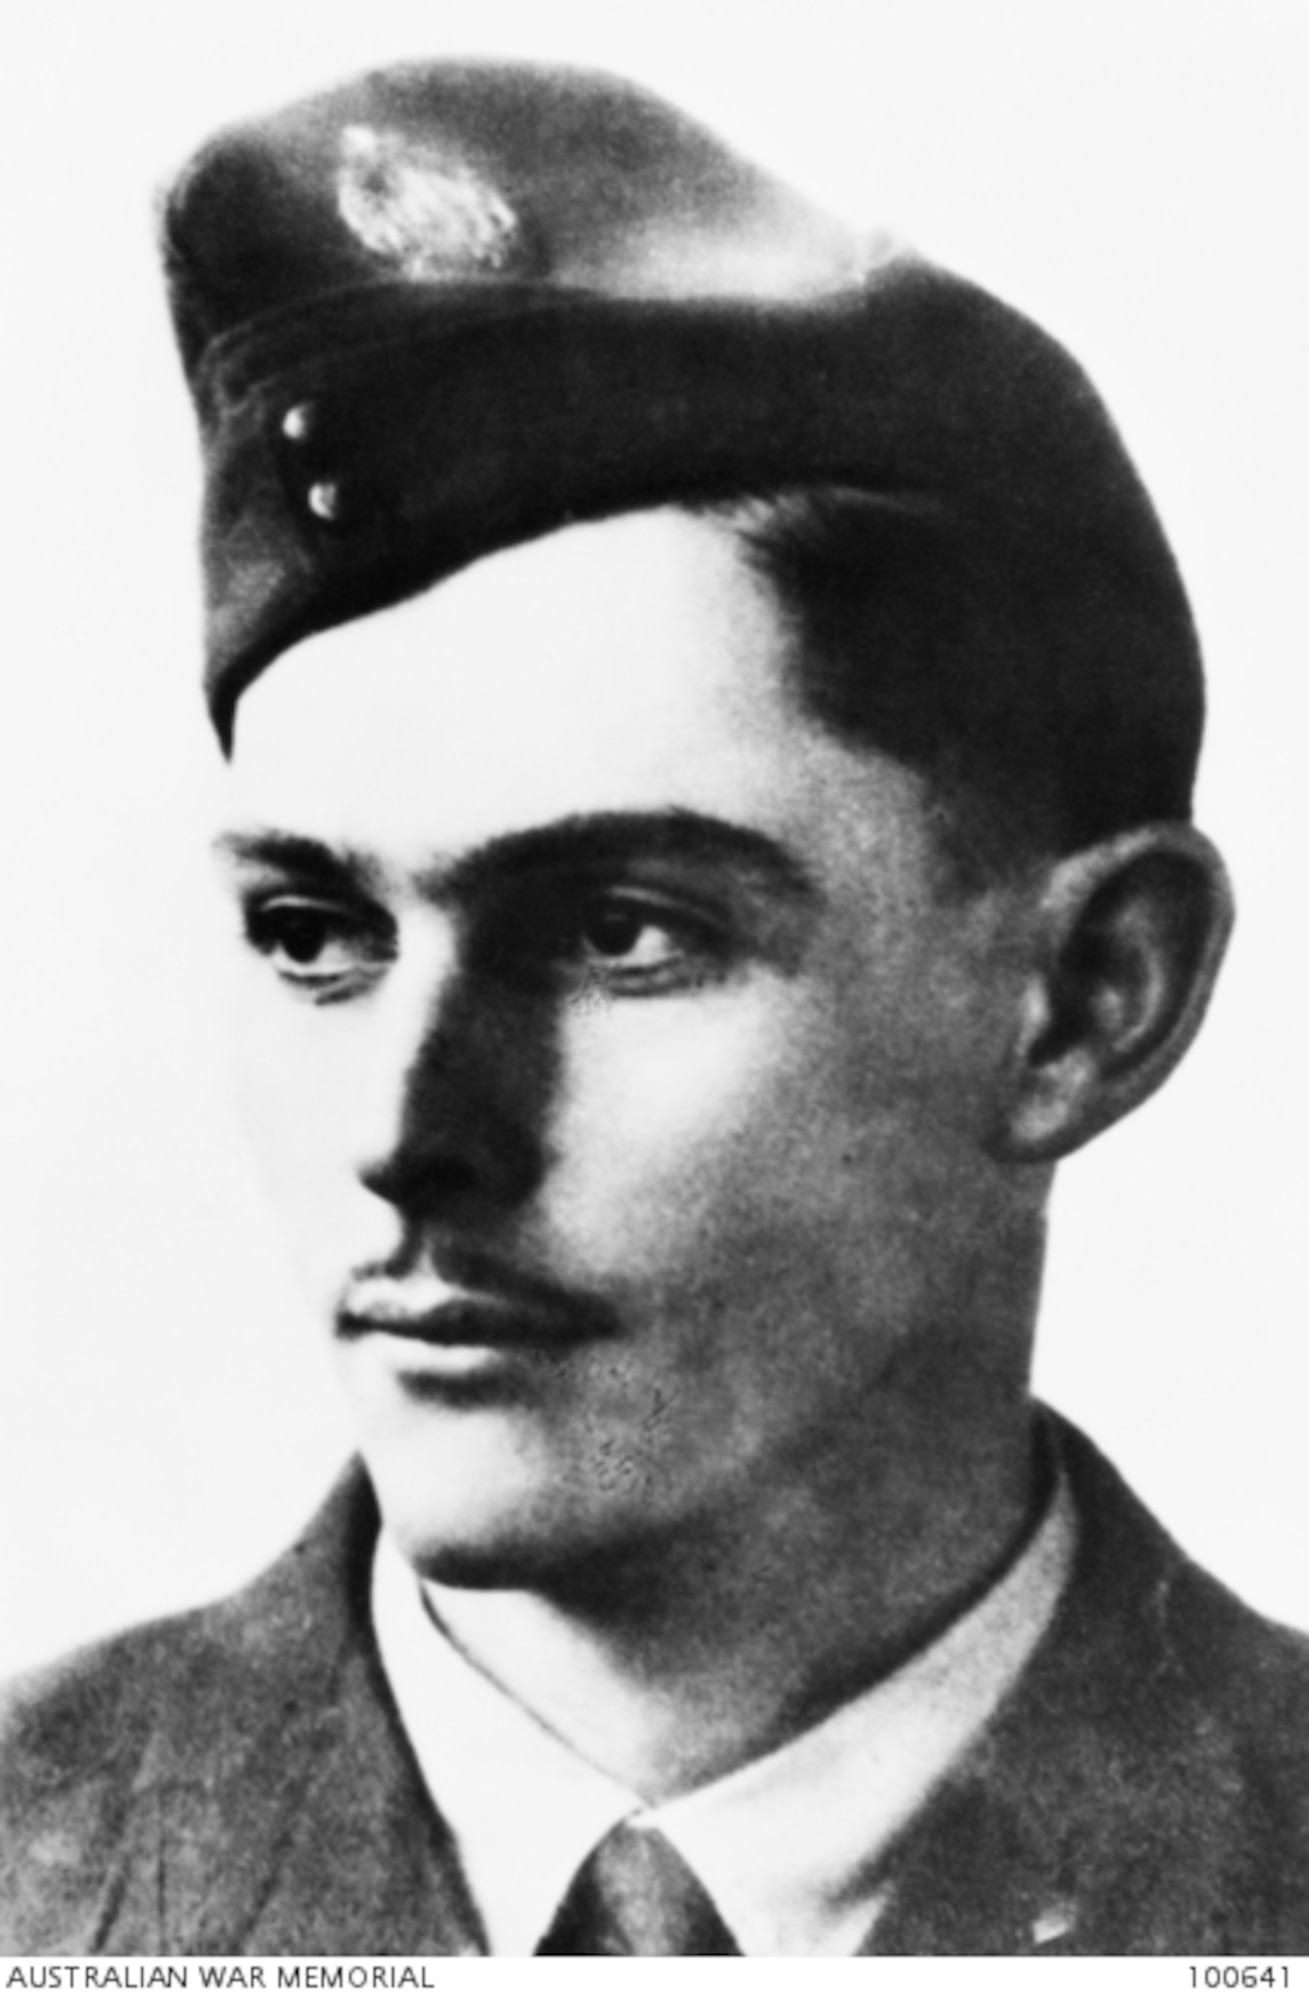 Pilot Officer Rawdon Hume Middleton was born in Australia in 1916. He died at the age of 26 and was laid to rest in Beck Row, England. (photo courtesy of the Australian War Memorial)